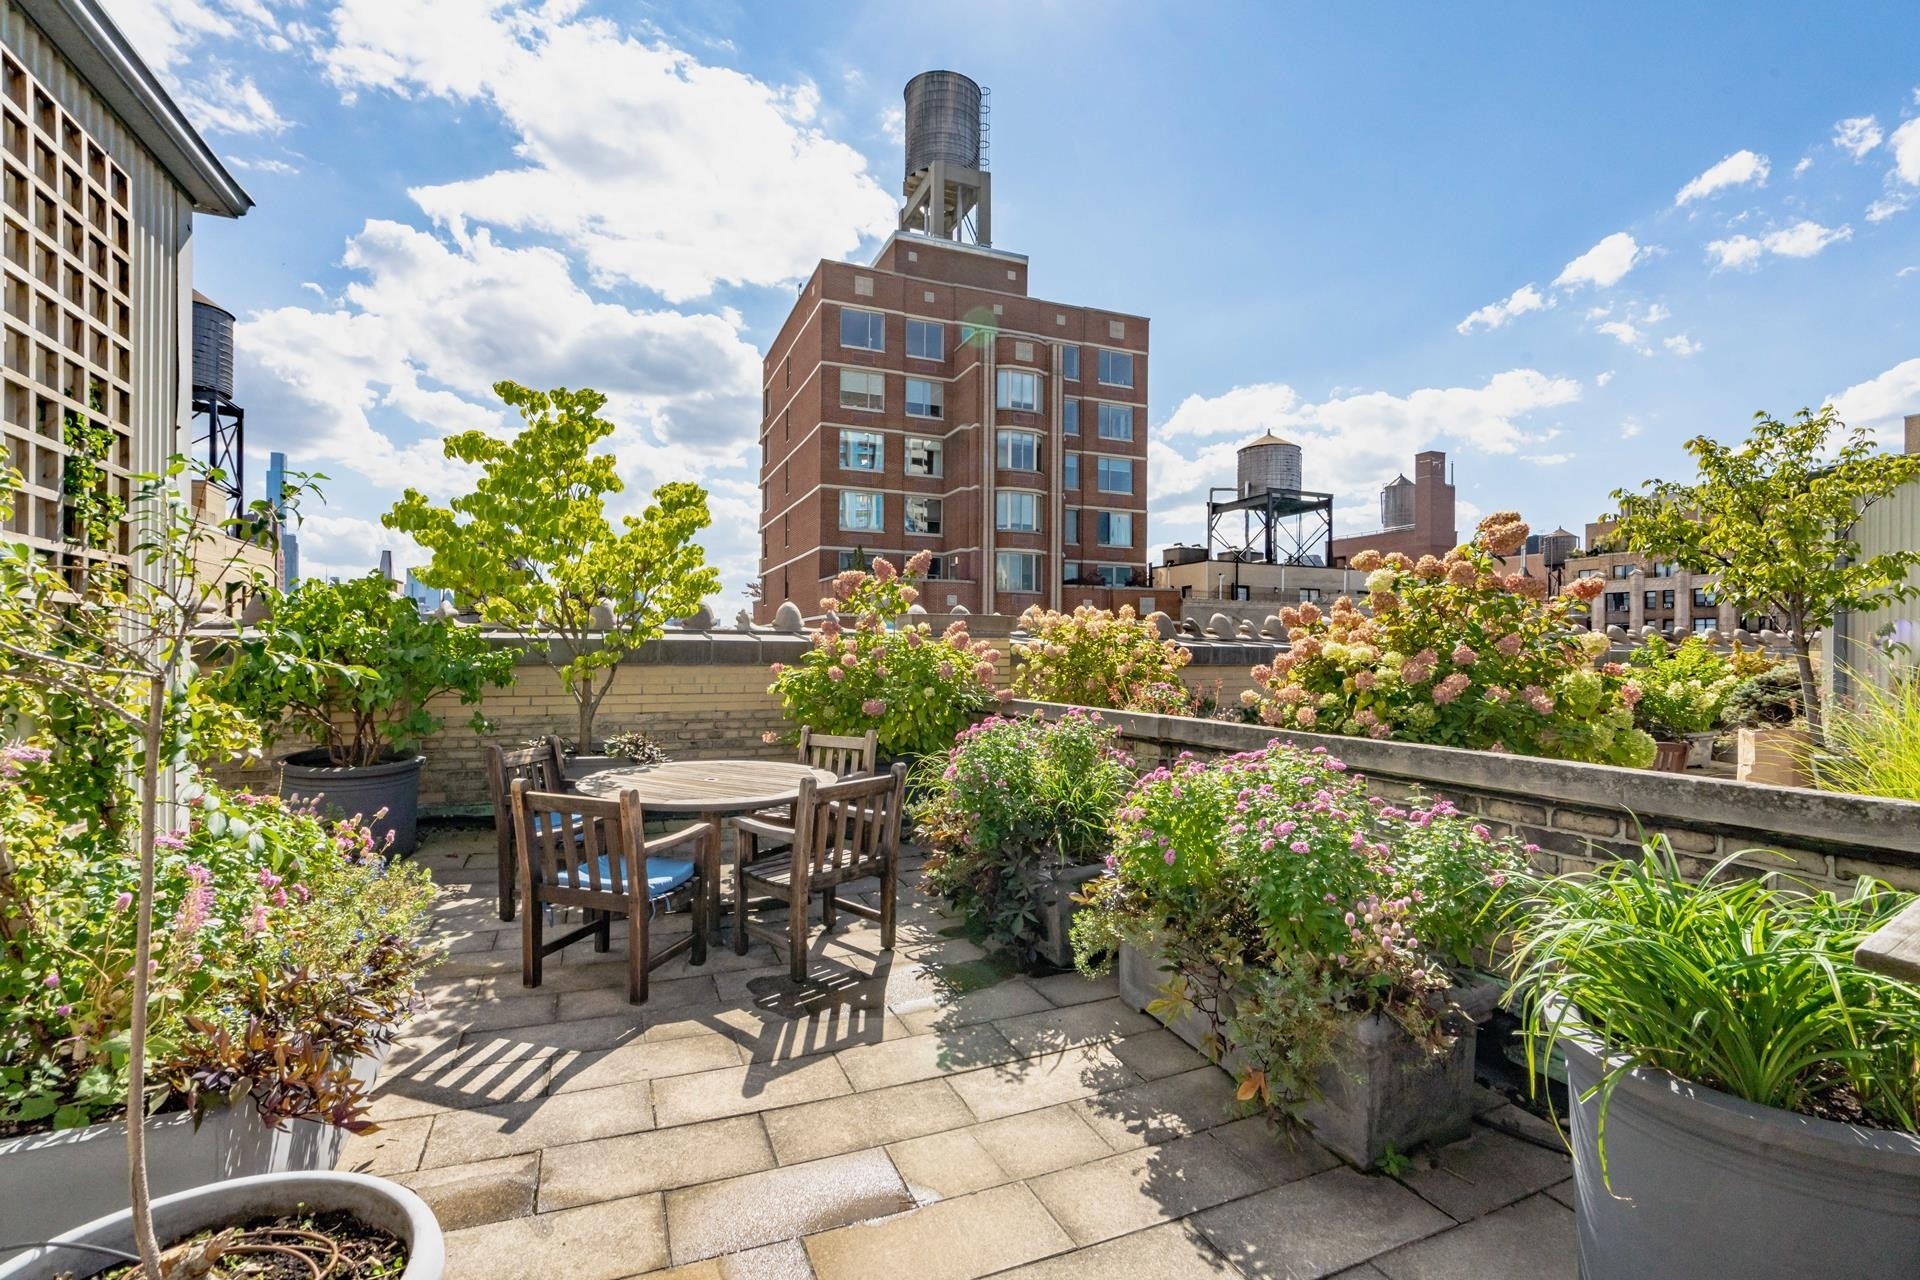 12. Co-op Properties for Sale at 151 W 86TH ST, 9C Upper West Side, New York, New York 10024